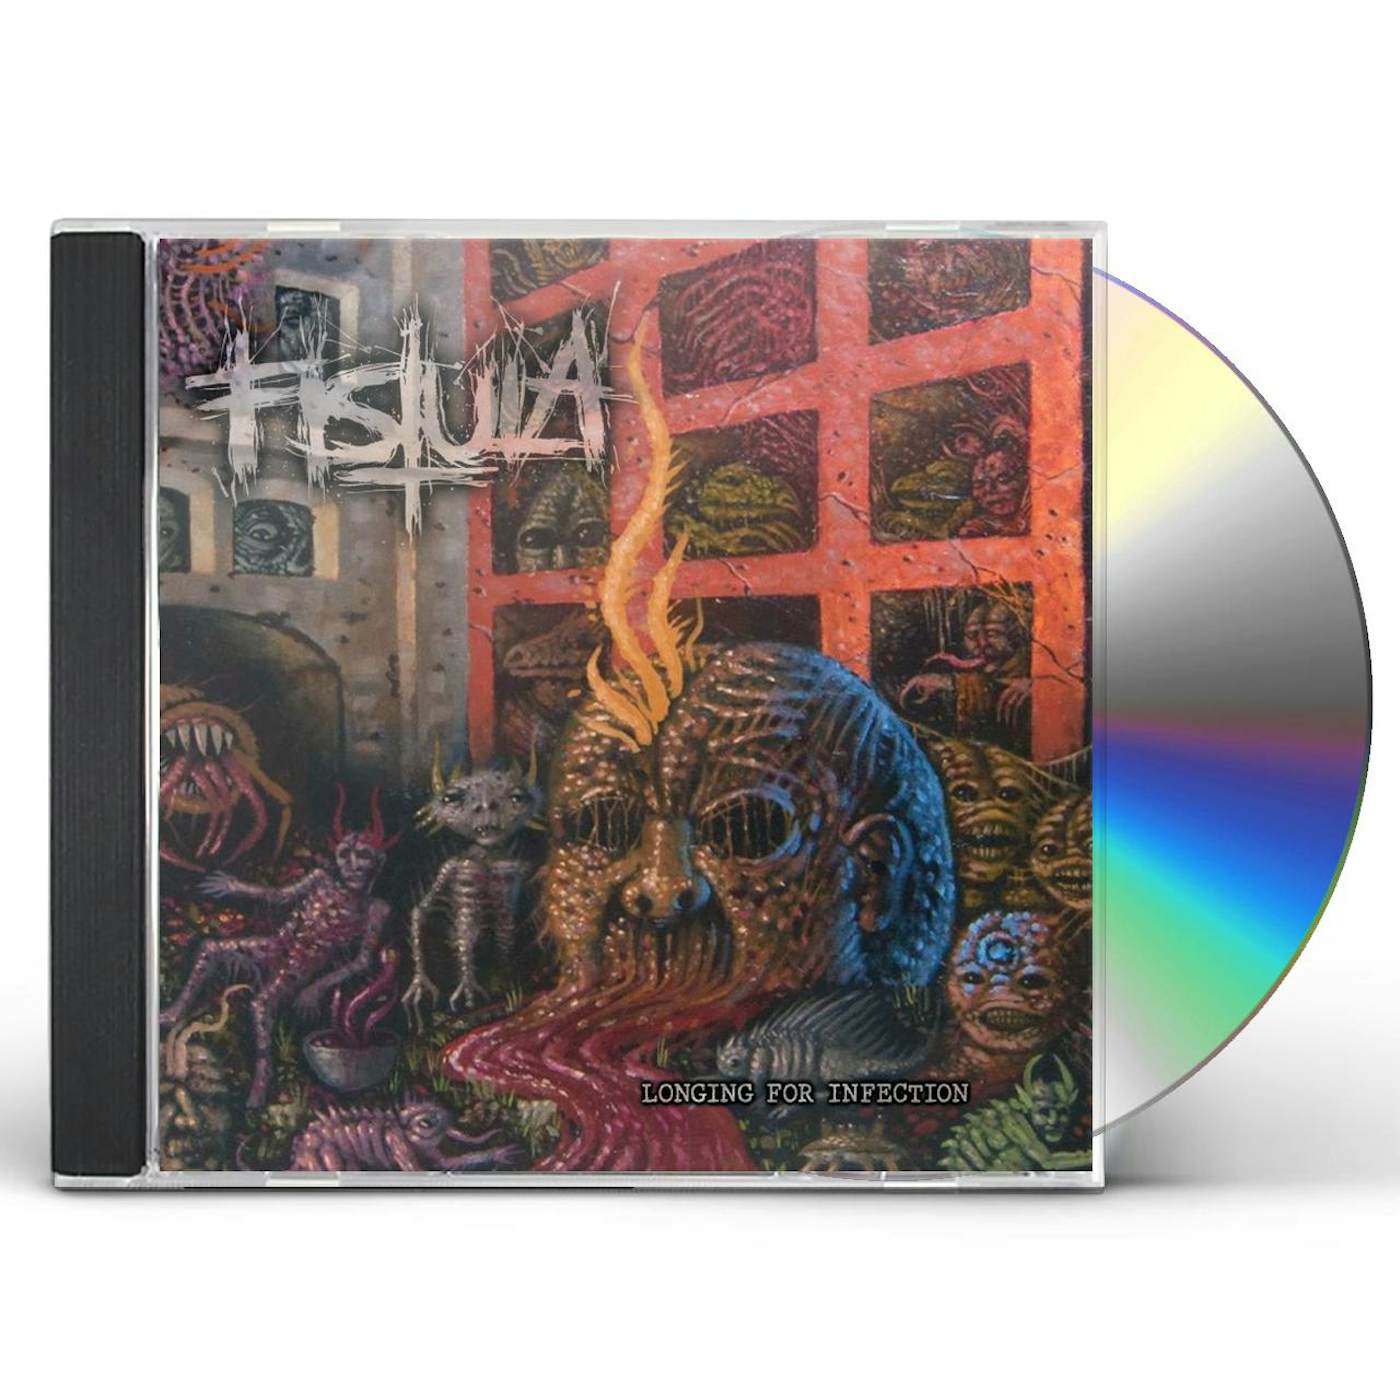 Fistula LONGING FOR INFECTION CD